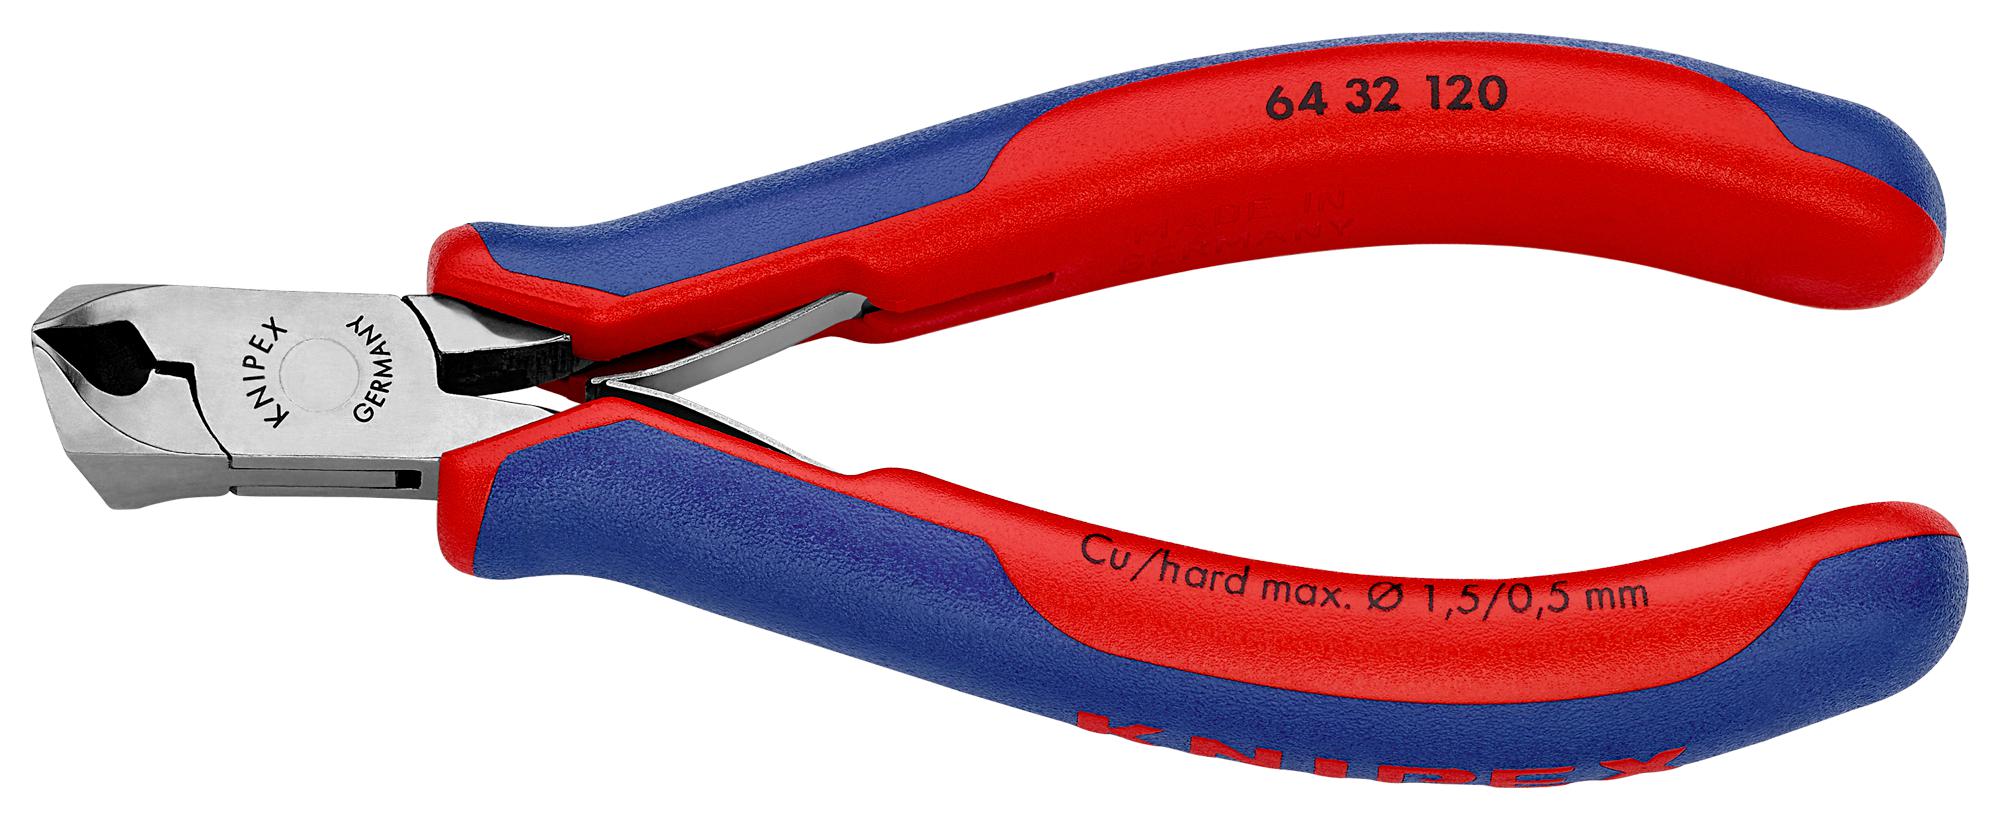 64 32 120 CUTTER, OBLIQUE, 120MM KNIPEX